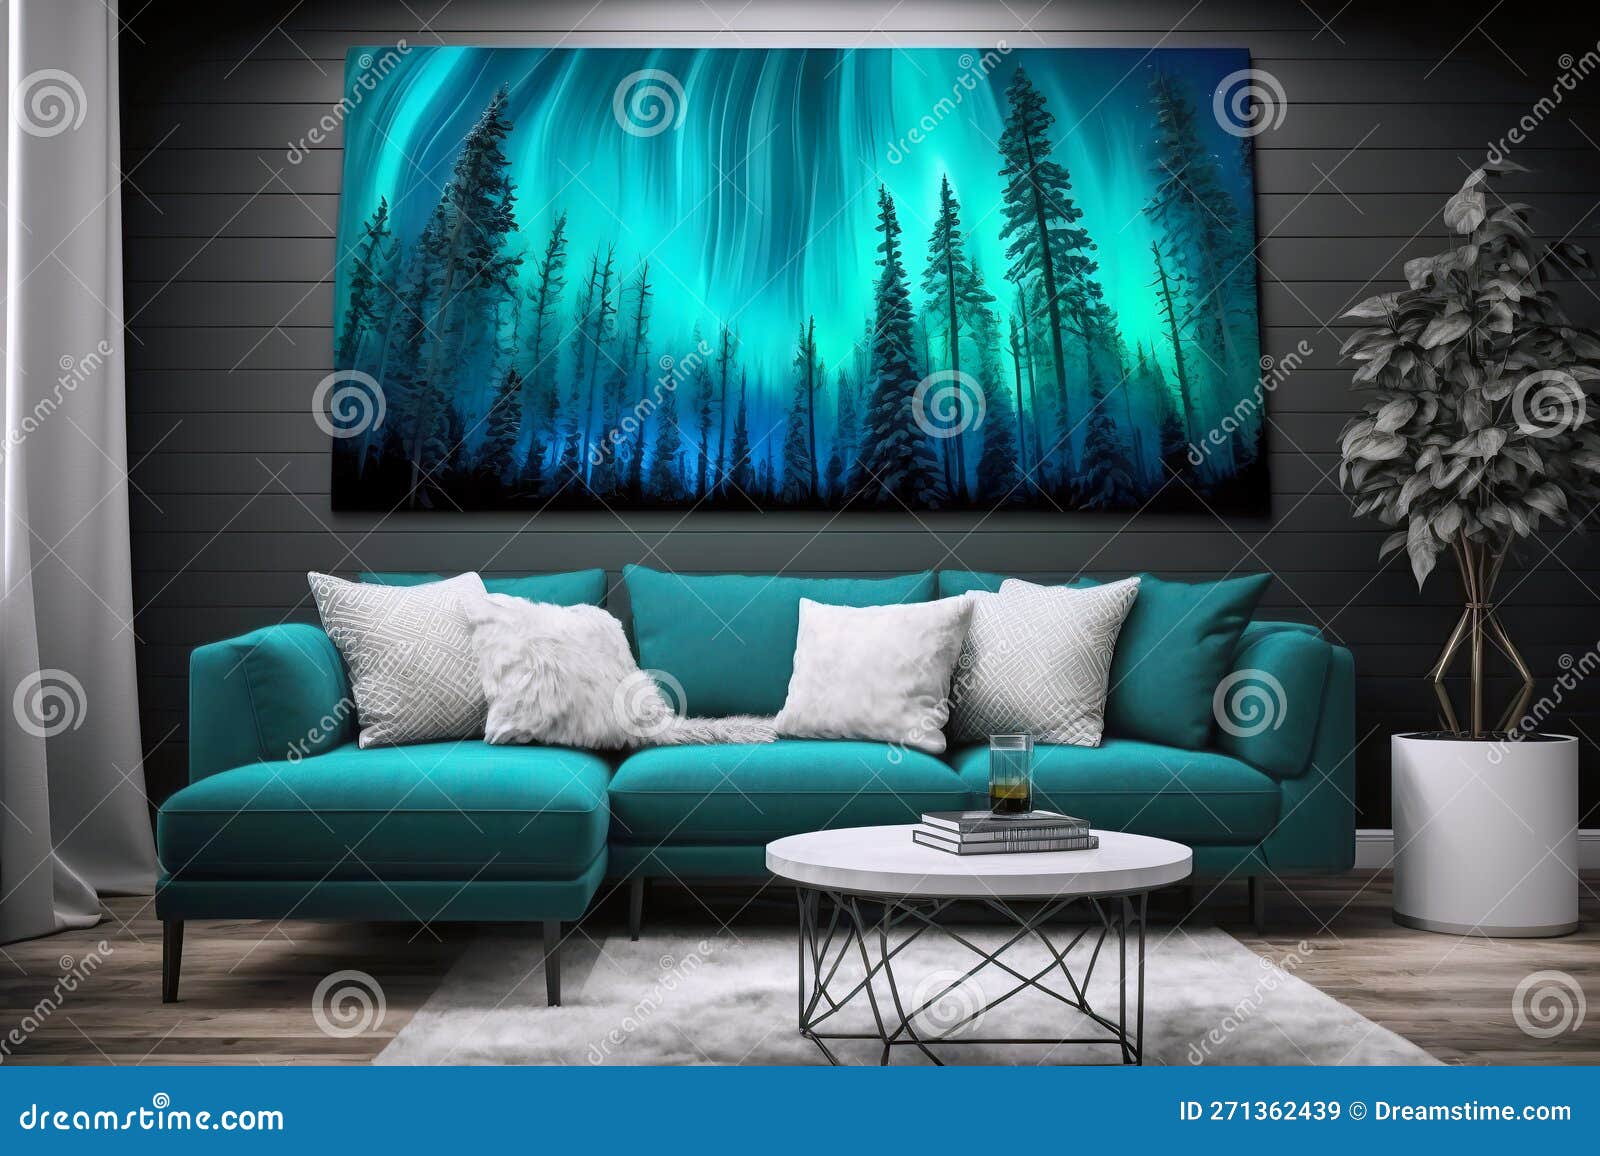 art moderne style living room interior with an aurora borealis (polar lights) painting on a wall